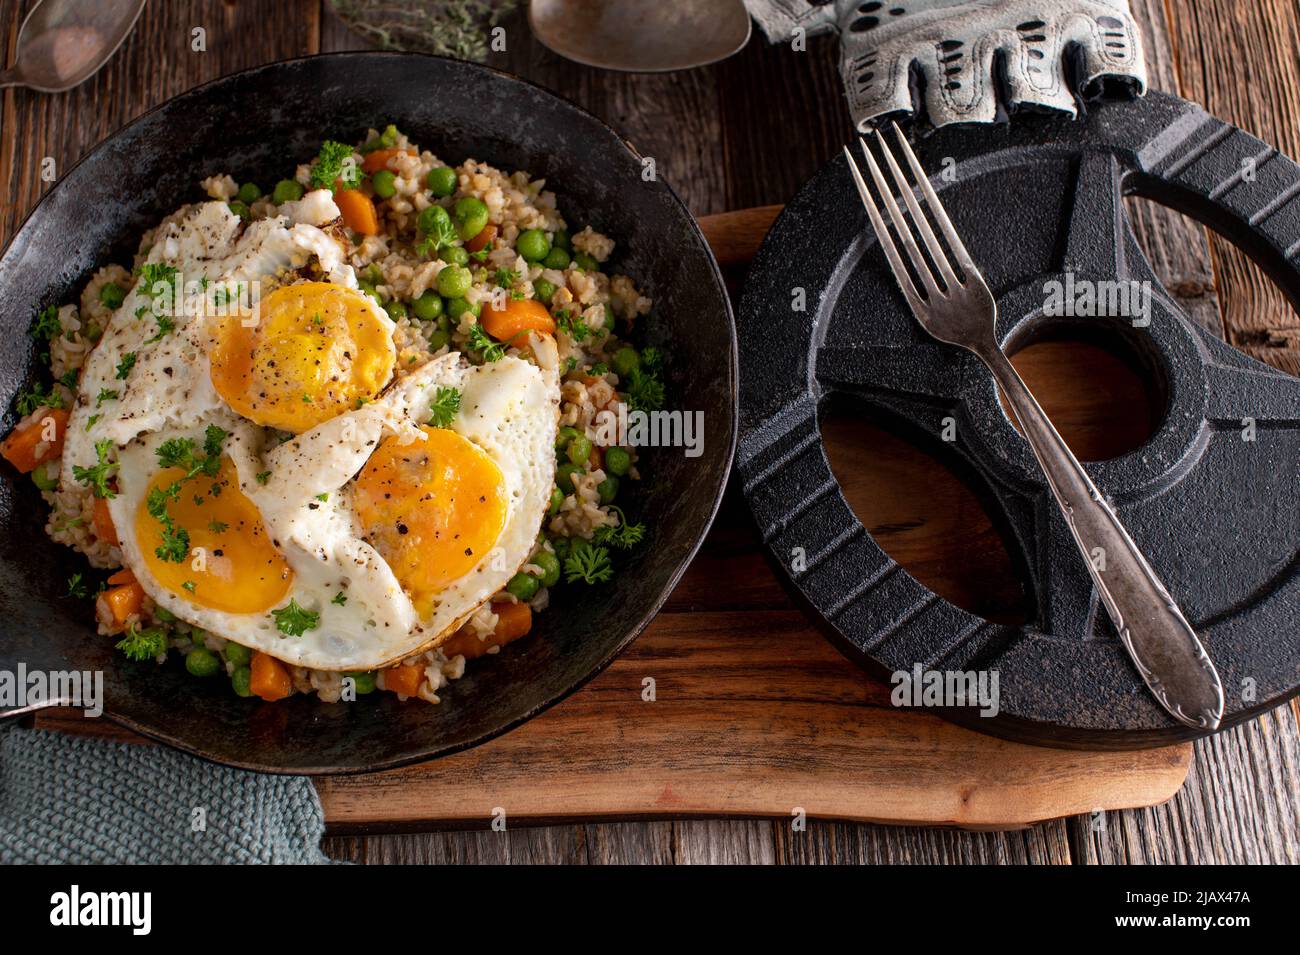 Fitness meal with fried eggs, brown rice and vegetables Stock Photo